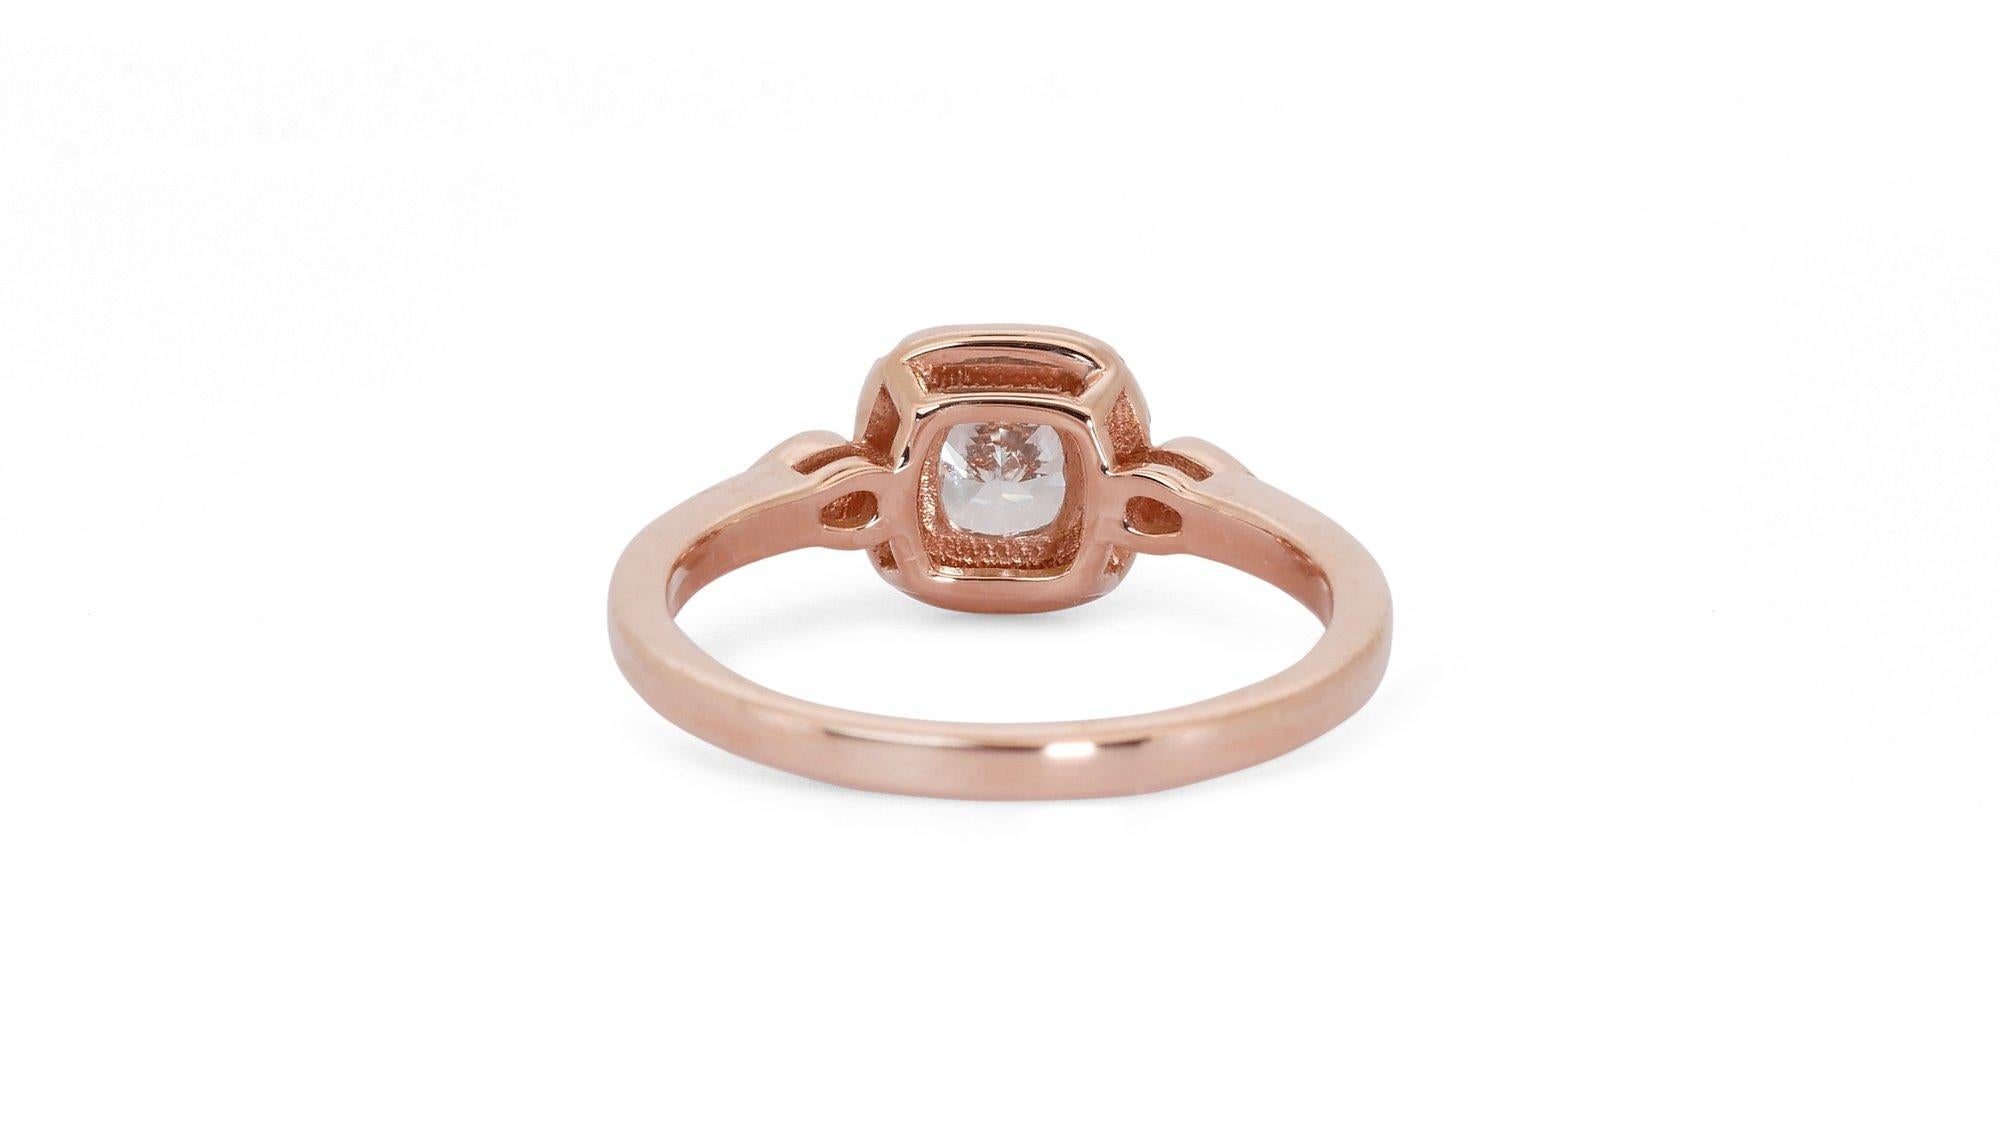 Dazzling 1.10ct Diamonds Halo Ring in 18k Rose Gold - GIA Certified For Sale 1